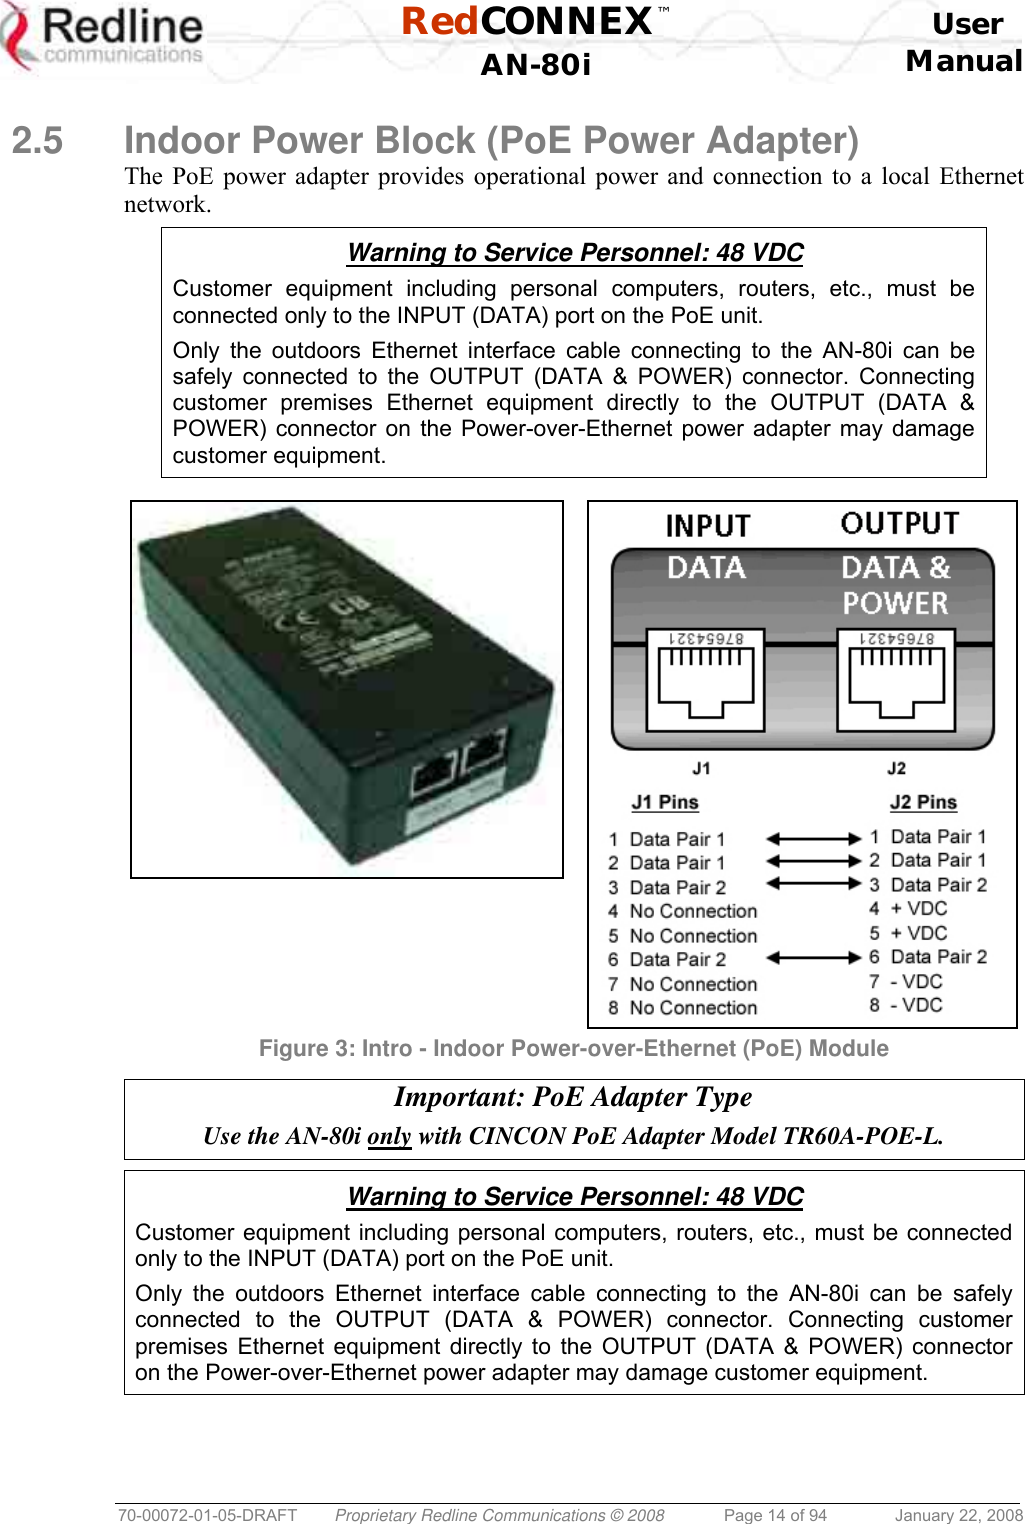  RedCONNEX™    User  AN-80i Manual  70-00072-01-05-DRAFT  Proprietary Redline Communications © 2008  Page 14 of 94  January 22, 2008  2.5  Indoor Power Block (PoE Power Adapter) The PoE power adapter provides operational power and connection to a local Ethernet network.  Warning to Service Personnel: 48 VDC Customer equipment including personal computers, routers, etc., must be connected only to the INPUT (DATA) port on the PoE unit.  Only the outdoors Ethernet interface cable connecting to the AN-80i can be safely connected to the OUTPUT (DATA &amp; POWER) connector. Connecting customer premises Ethernet equipment directly to the OUTPUT (DATA &amp; POWER) connector on the Power-over-Ethernet power adapter may damage customer equipment.   Figure 3: Intro - Indoor Power-over-Ethernet (PoE) Module  Important: PoE Adapter Type Use the AN-80i only with CINCON PoE Adapter Model TR60A-POE-L.   Warning to Service Personnel: 48 VDC Customer equipment including personal computers, routers, etc., must be connected only to the INPUT (DATA) port on the PoE unit.  Only the outdoors Ethernet interface cable connecting to the AN-80i can be safely connected to the OUTPUT (DATA &amp; POWER) connector. Connecting customer premises Ethernet equipment directly to the OUTPUT (DATA &amp; POWER) connector on the Power-over-Ethernet power adapter may damage customer equipment.  